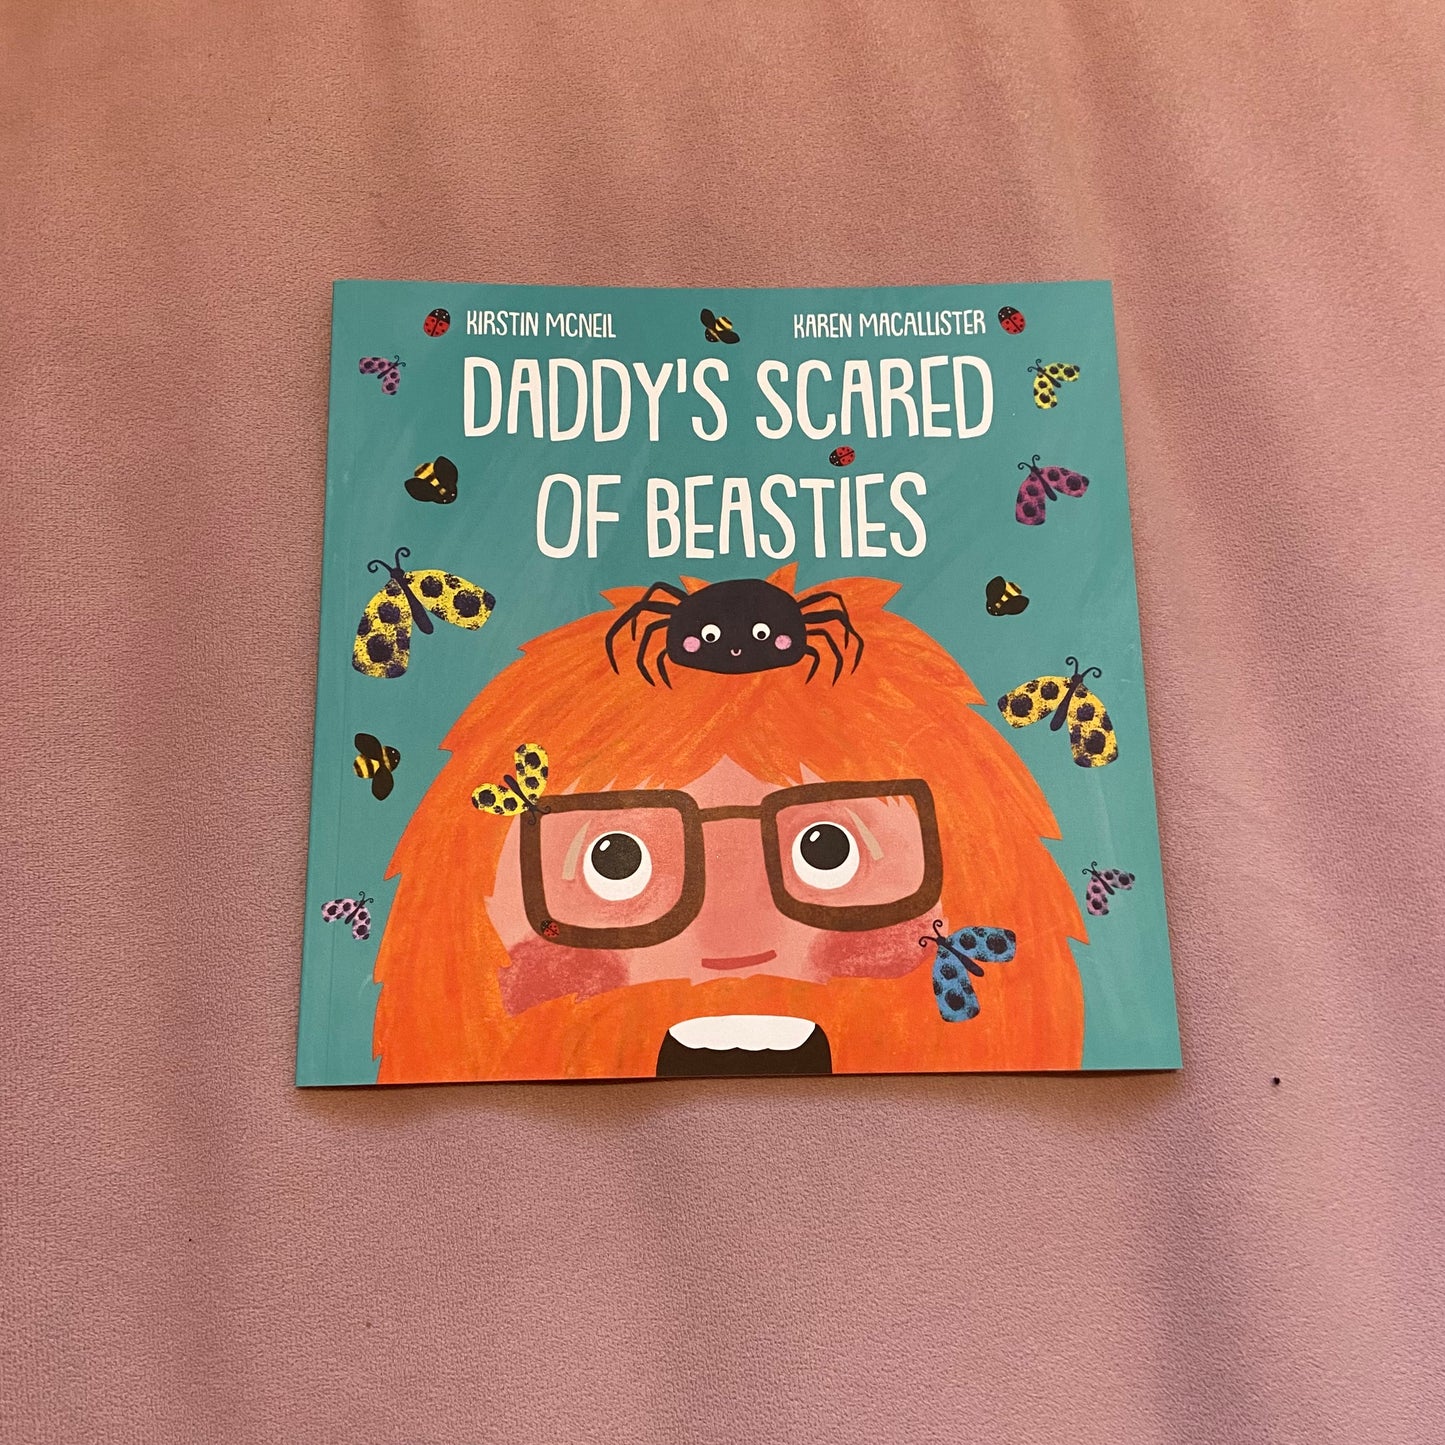 Free (damaged) copy: Daddy's Scared of Beasties